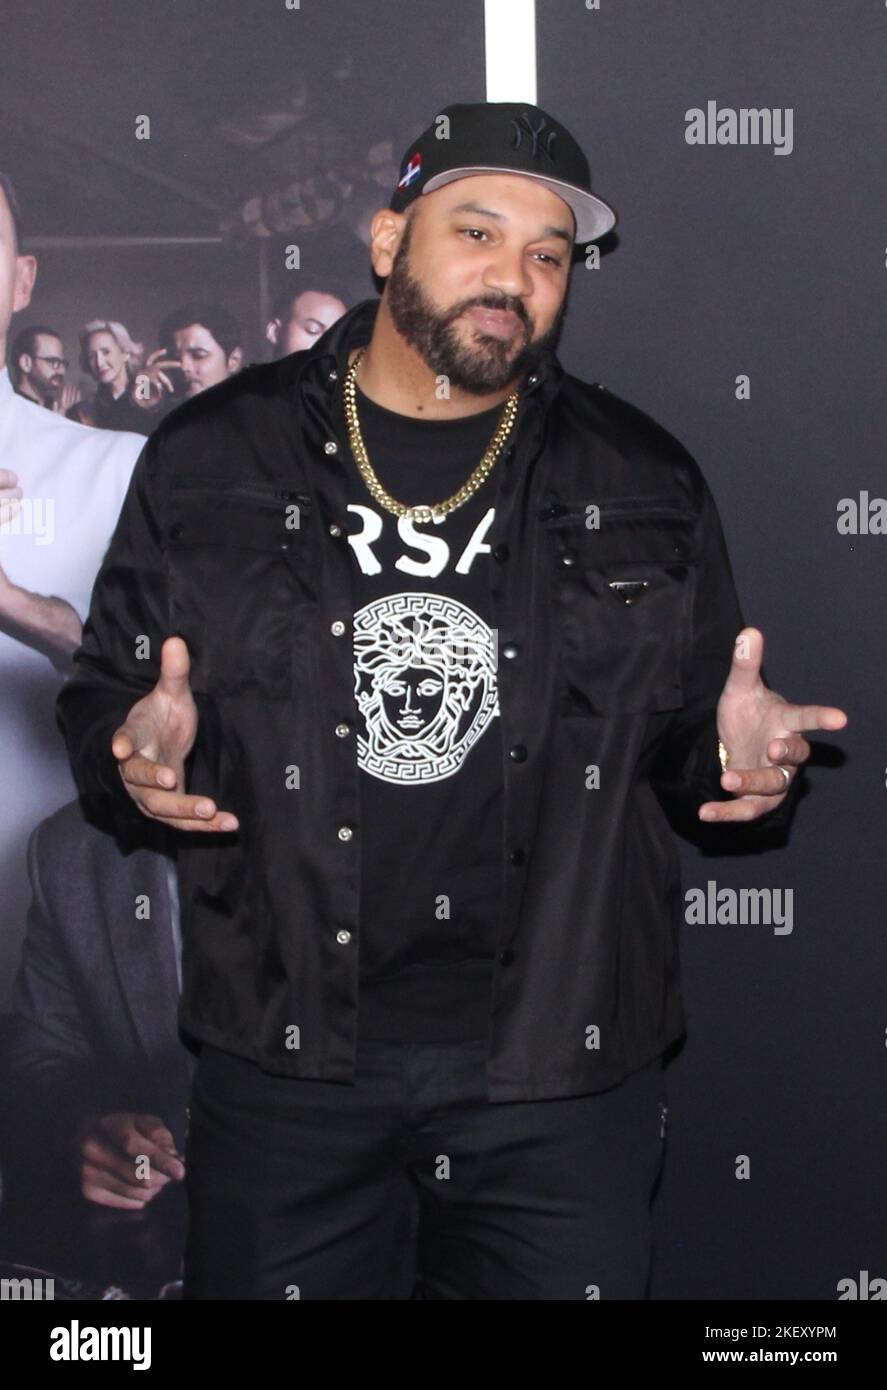 New York, NY, USA. 14th Nov, 2022. The Kid Mero at the NY Premiere of The Menu at AMC Lincoln Square on November 14, 2022 in New York City. Credit: Erik Nielsen/Media Punch/Alamy Live News Stock Photo